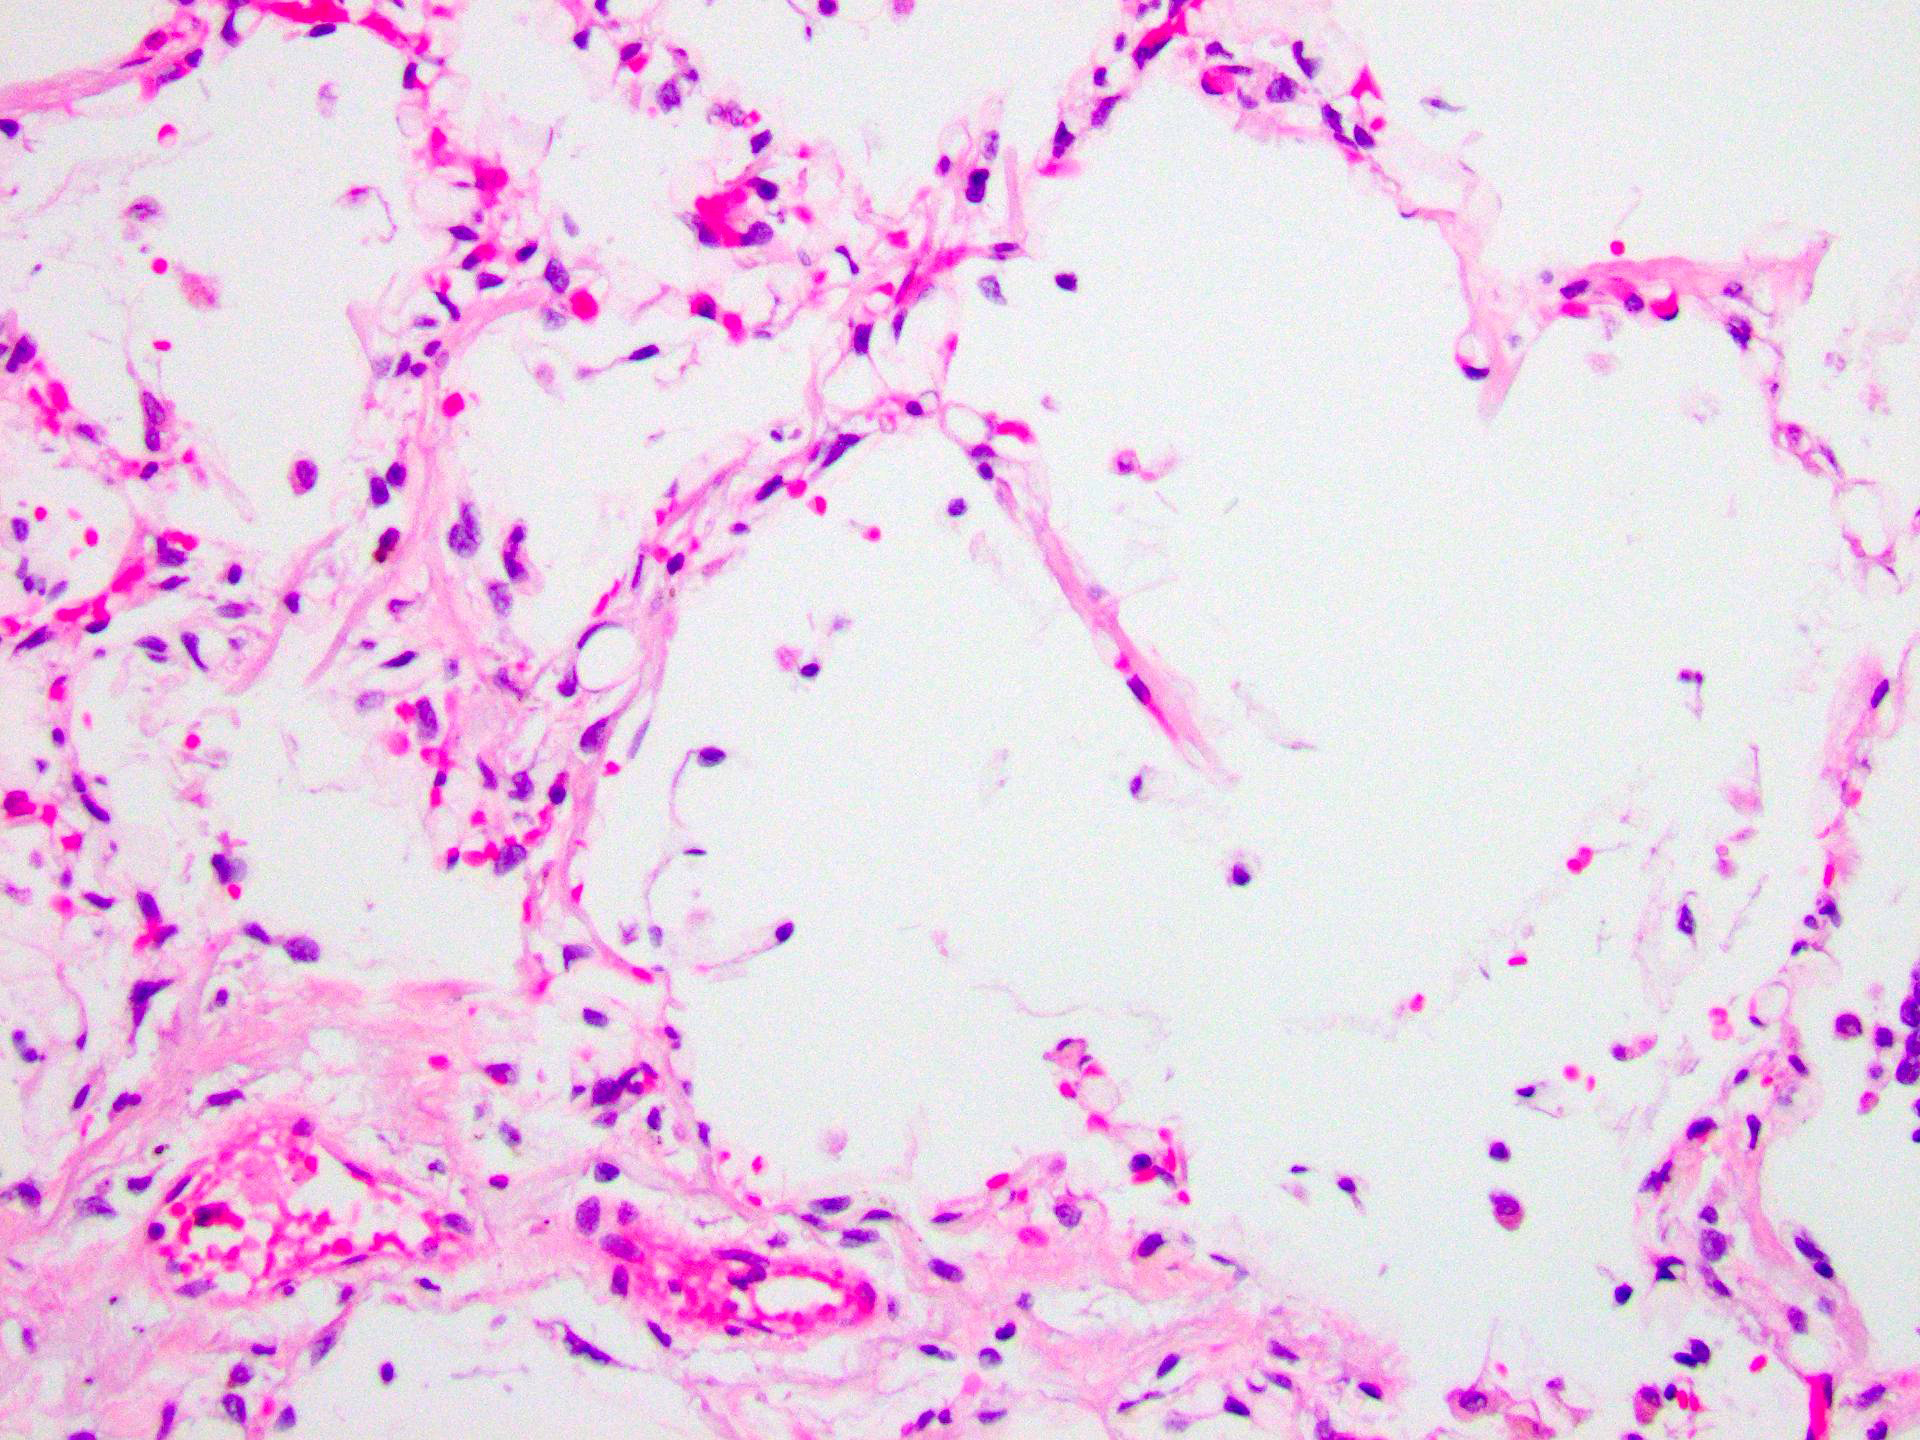 Figure 3: Rounded empty spaces within the intra-alveolar capillaries (H&E, 200x).